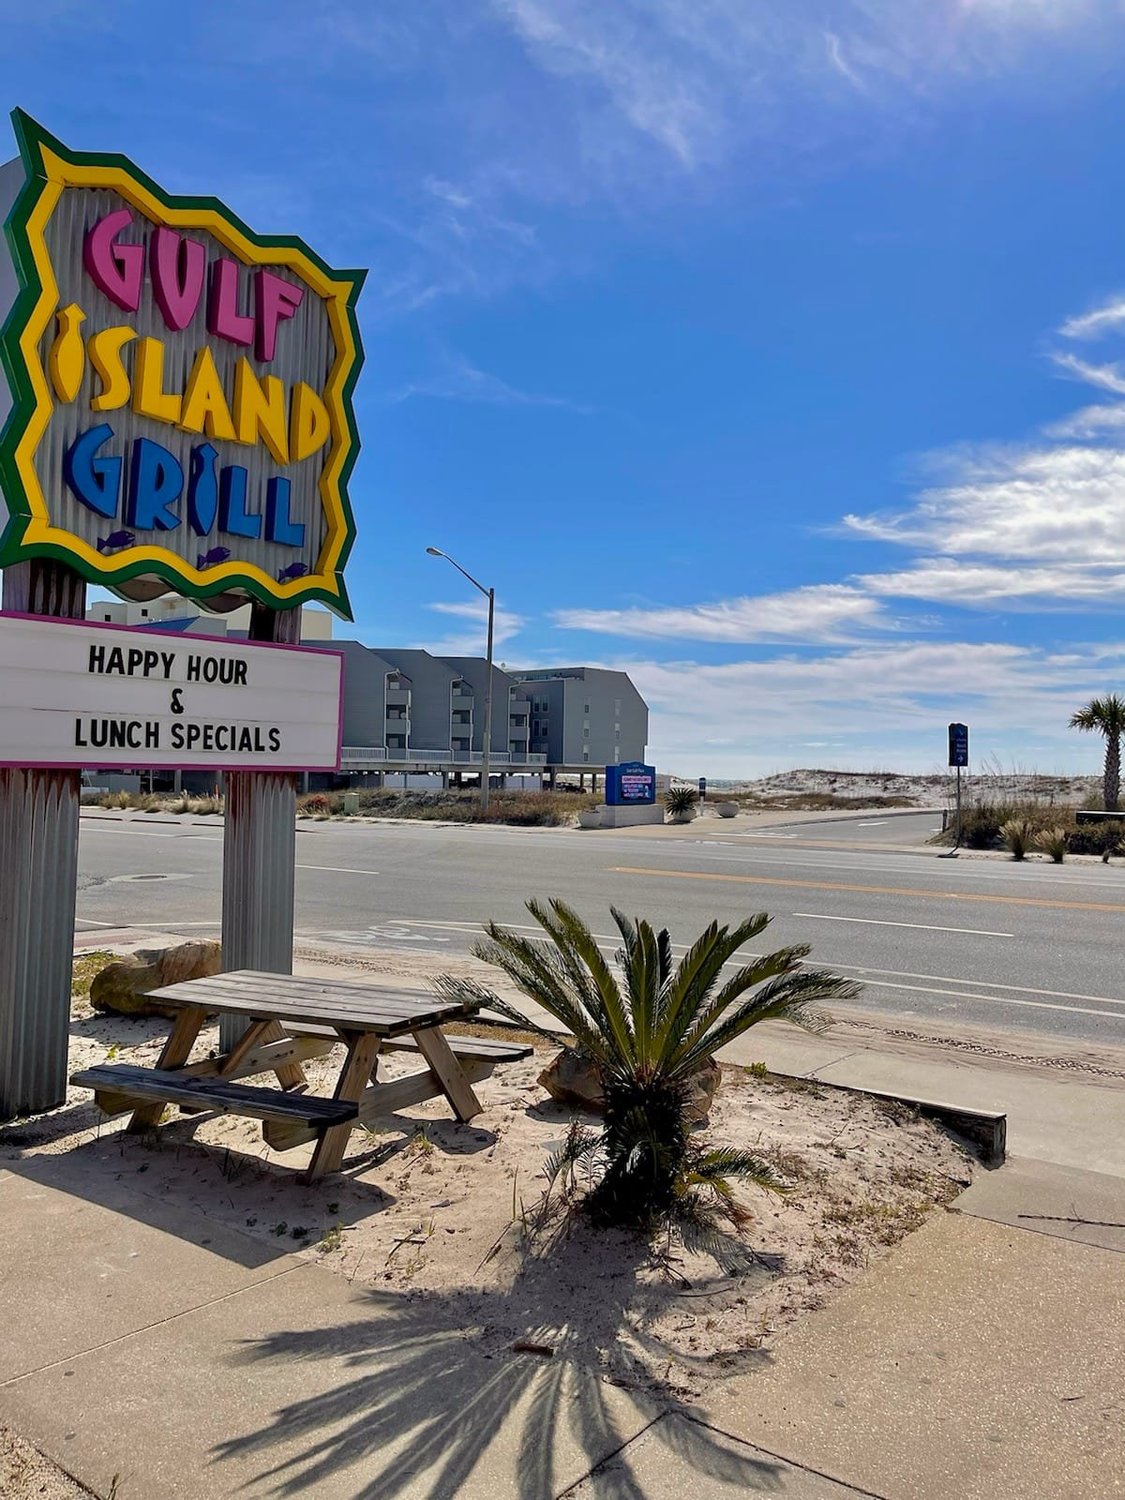 The Gulf Island Grill's menu has a wide range to please everyone in your party and is only a short walk away from the Gulf Place Public Beach area.